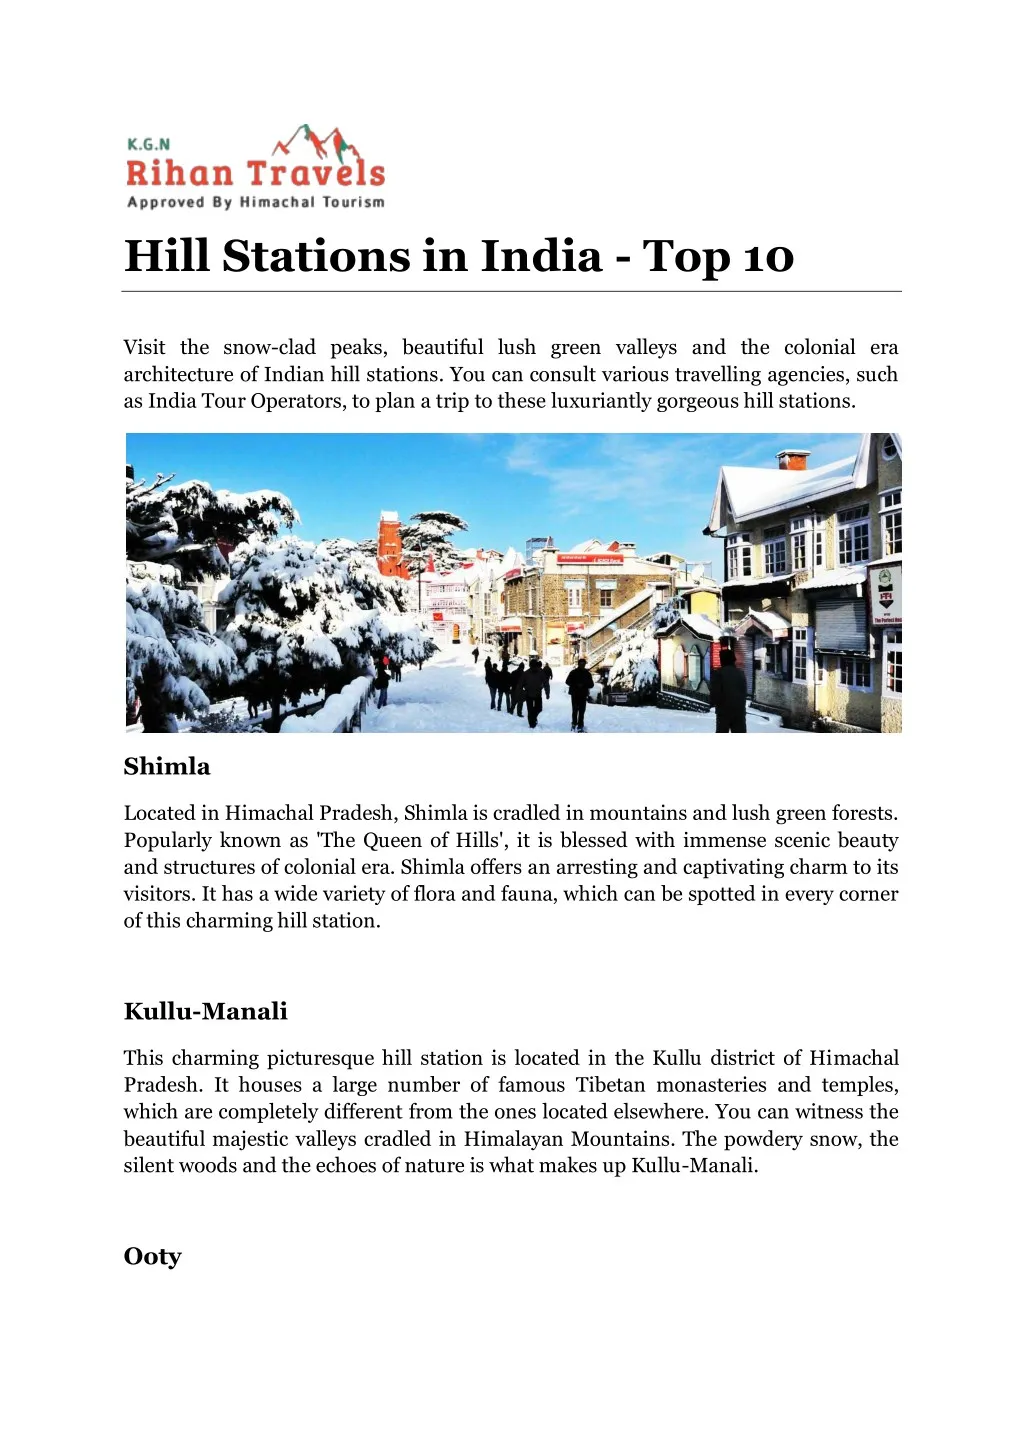 hill stations in india top 10